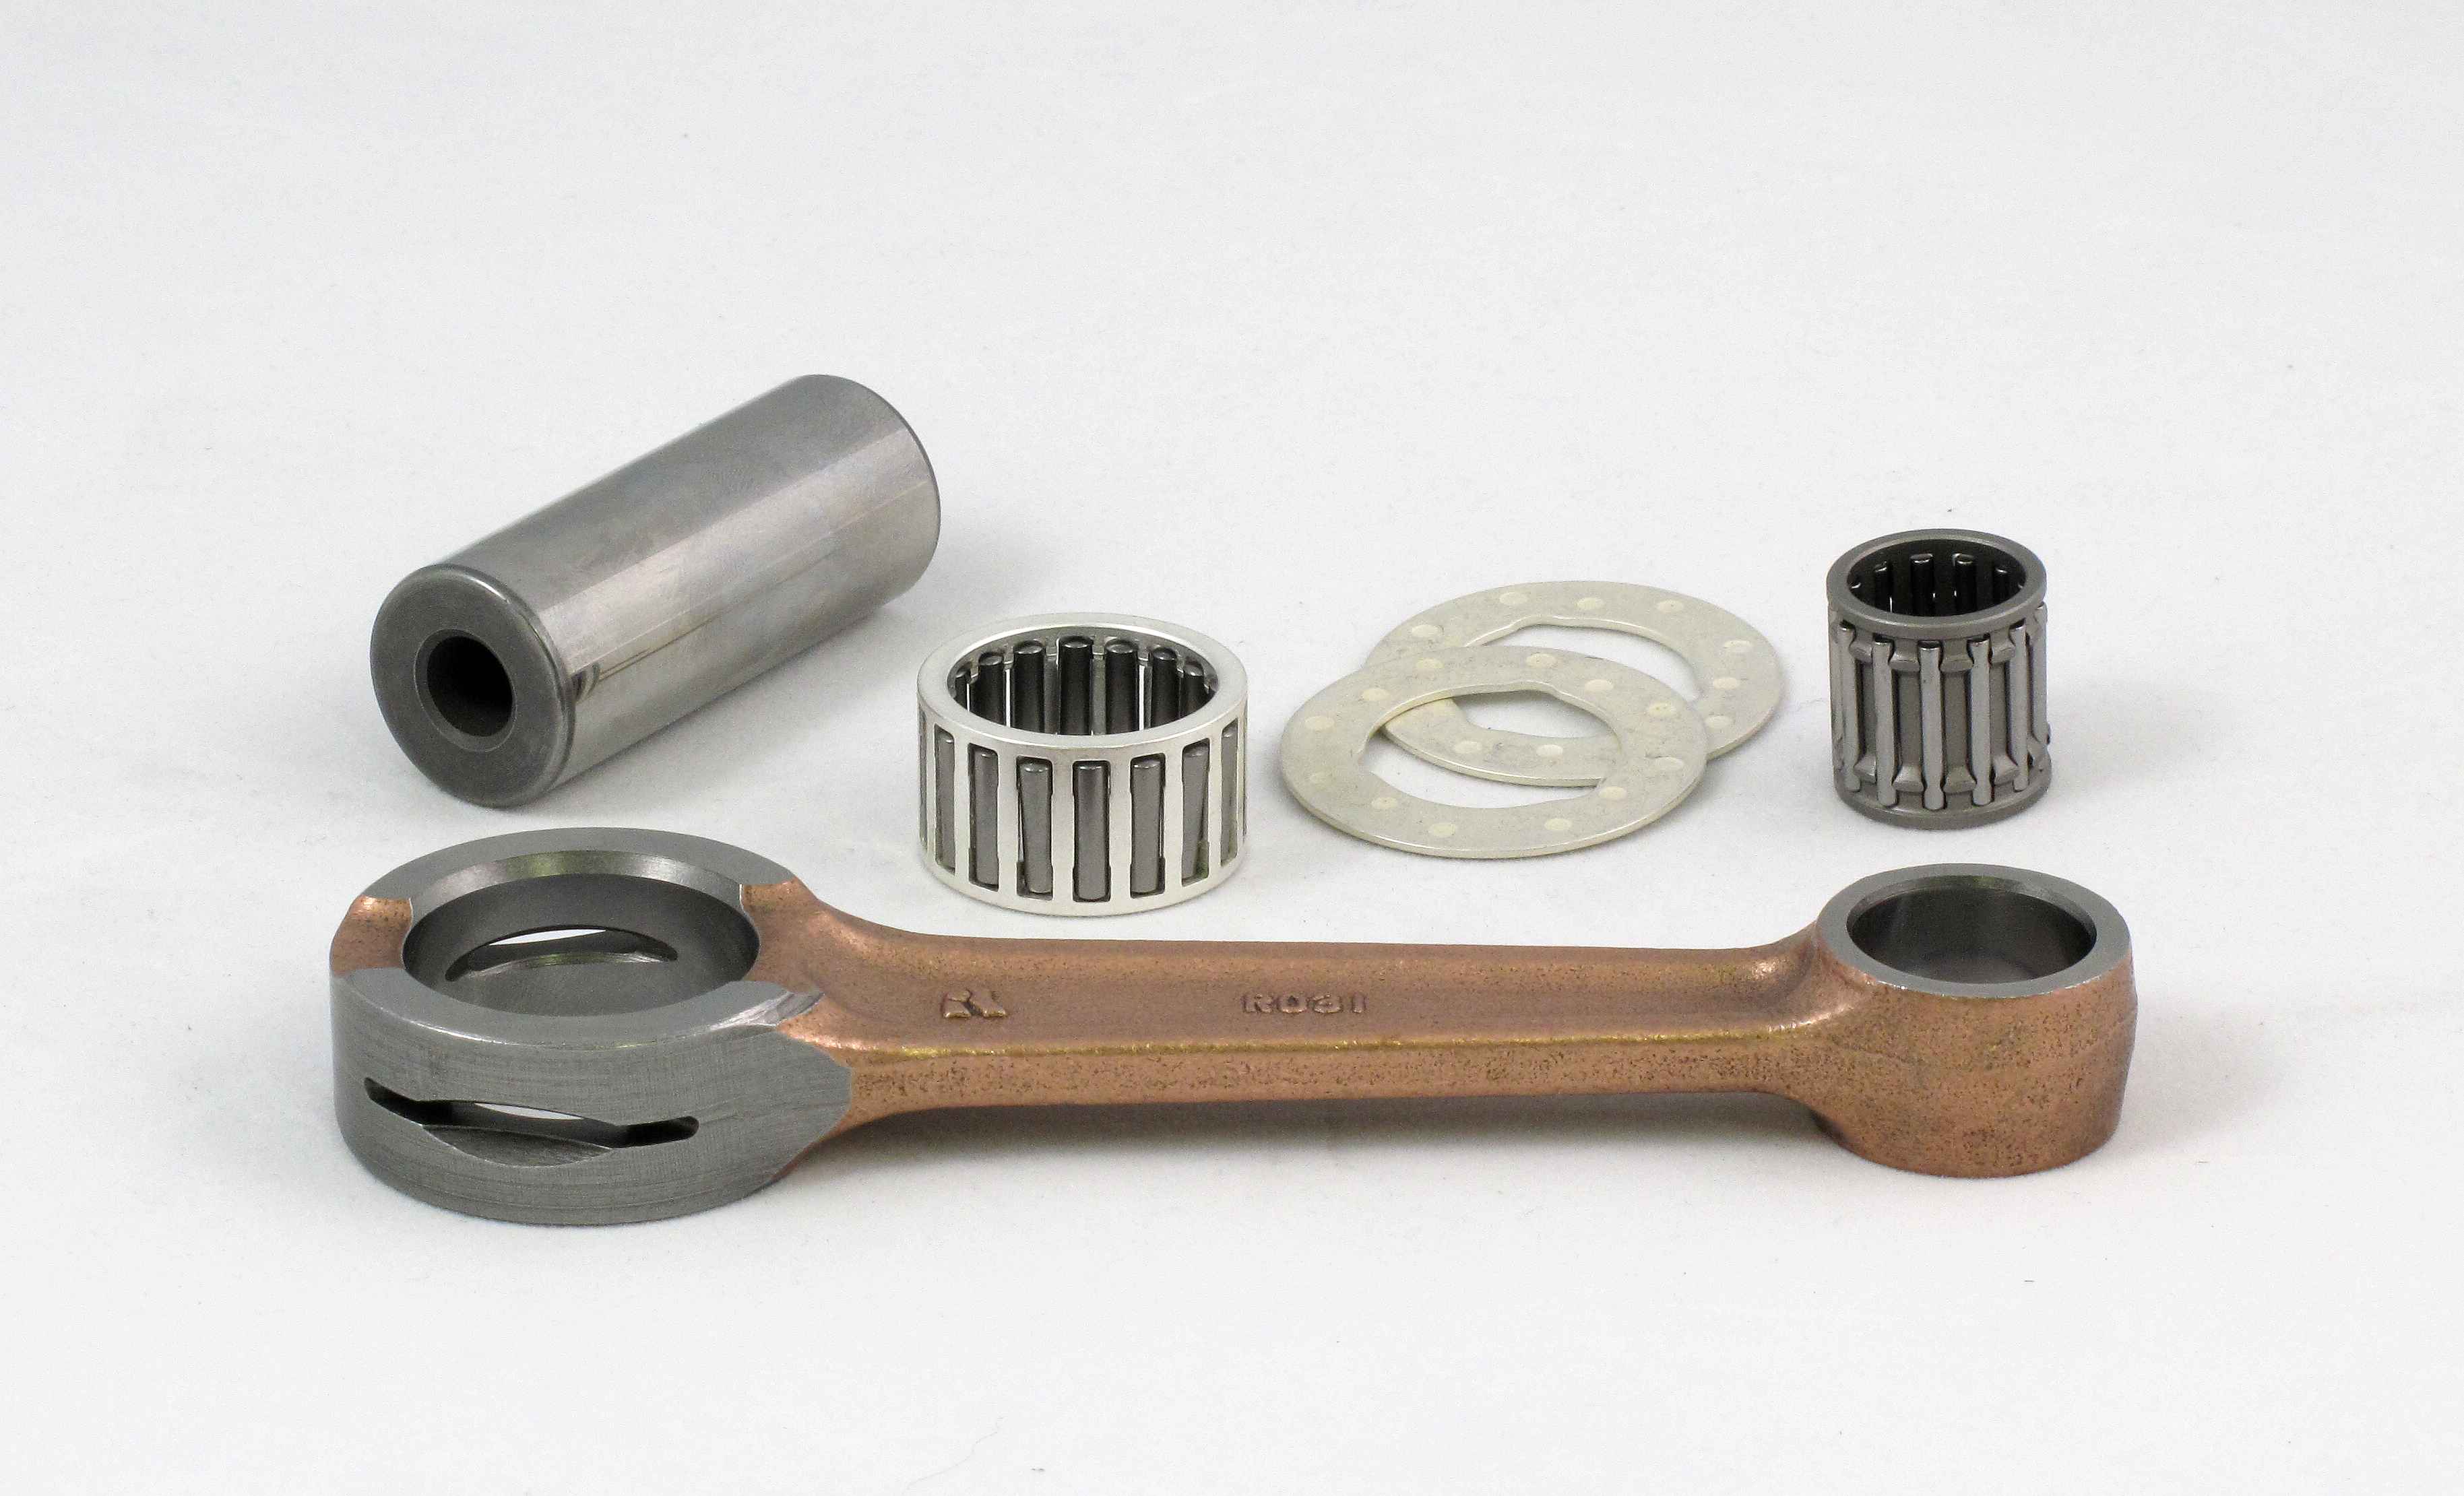 HONDA CR500 (EARLY PRE -87) CONNECTING ROD KIT (INC SPACER)